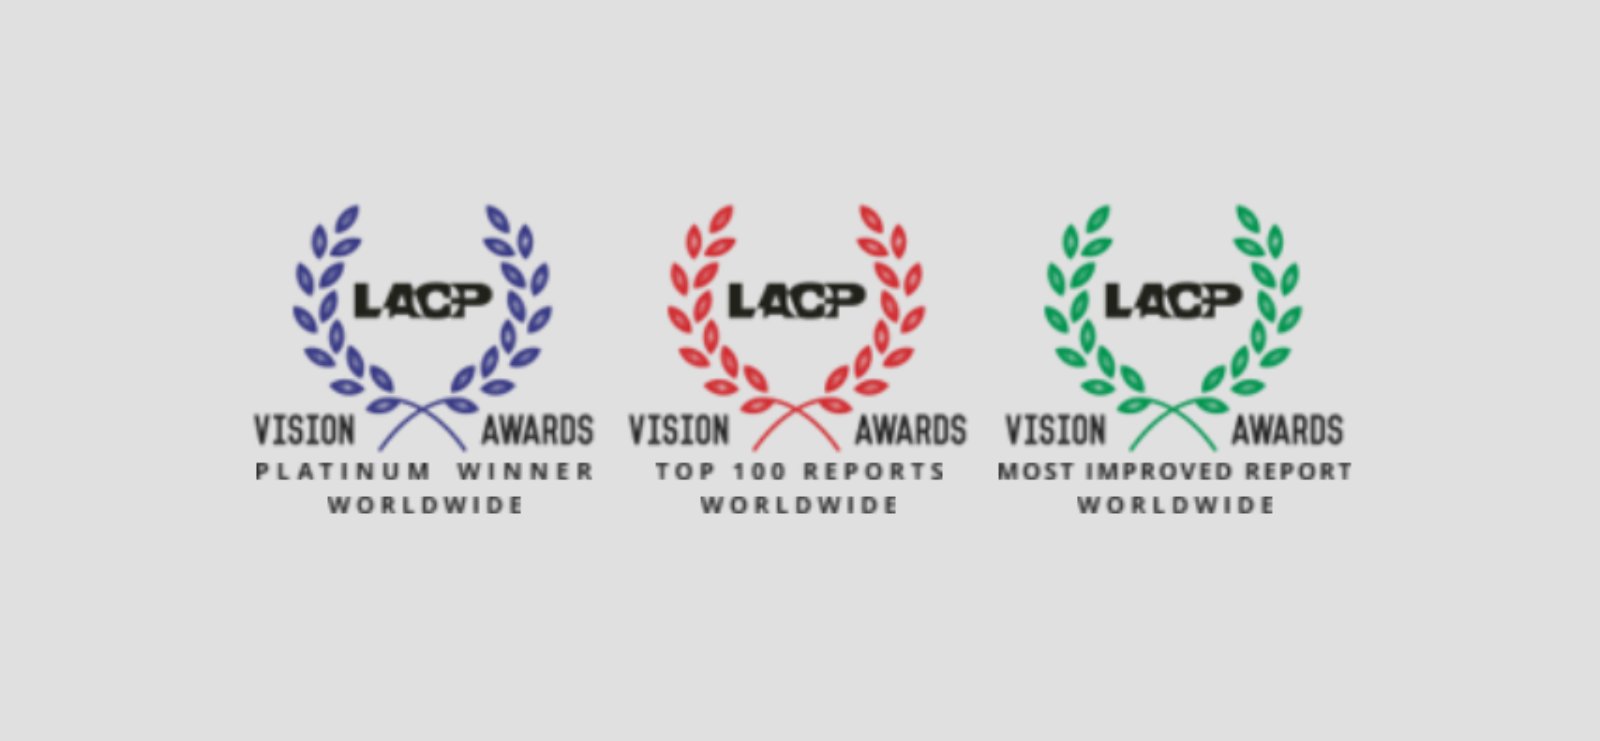 IC Holding 2021-2022 Sustainability Report received 3 awards from LACP